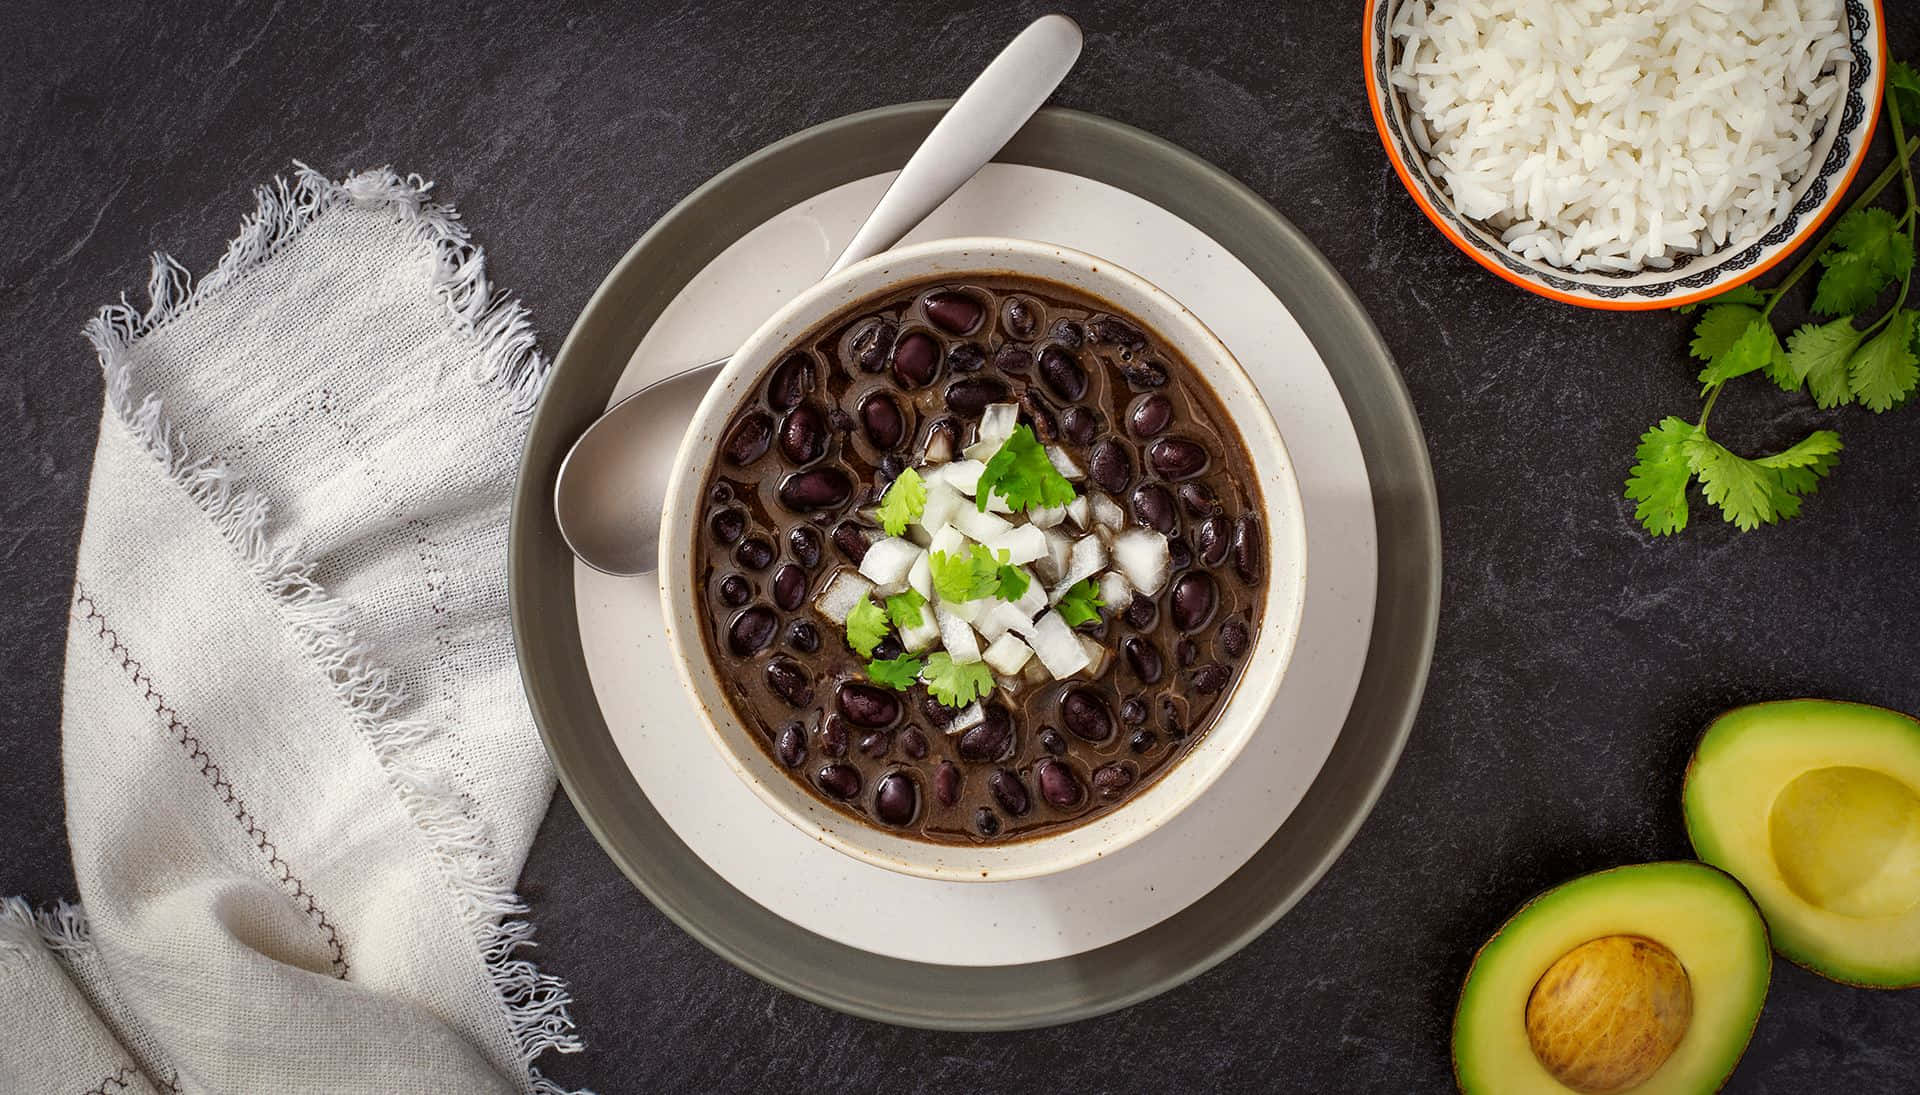 Enjoy a warm, delicious bowl of black bean soup for lunch! Wallpaper